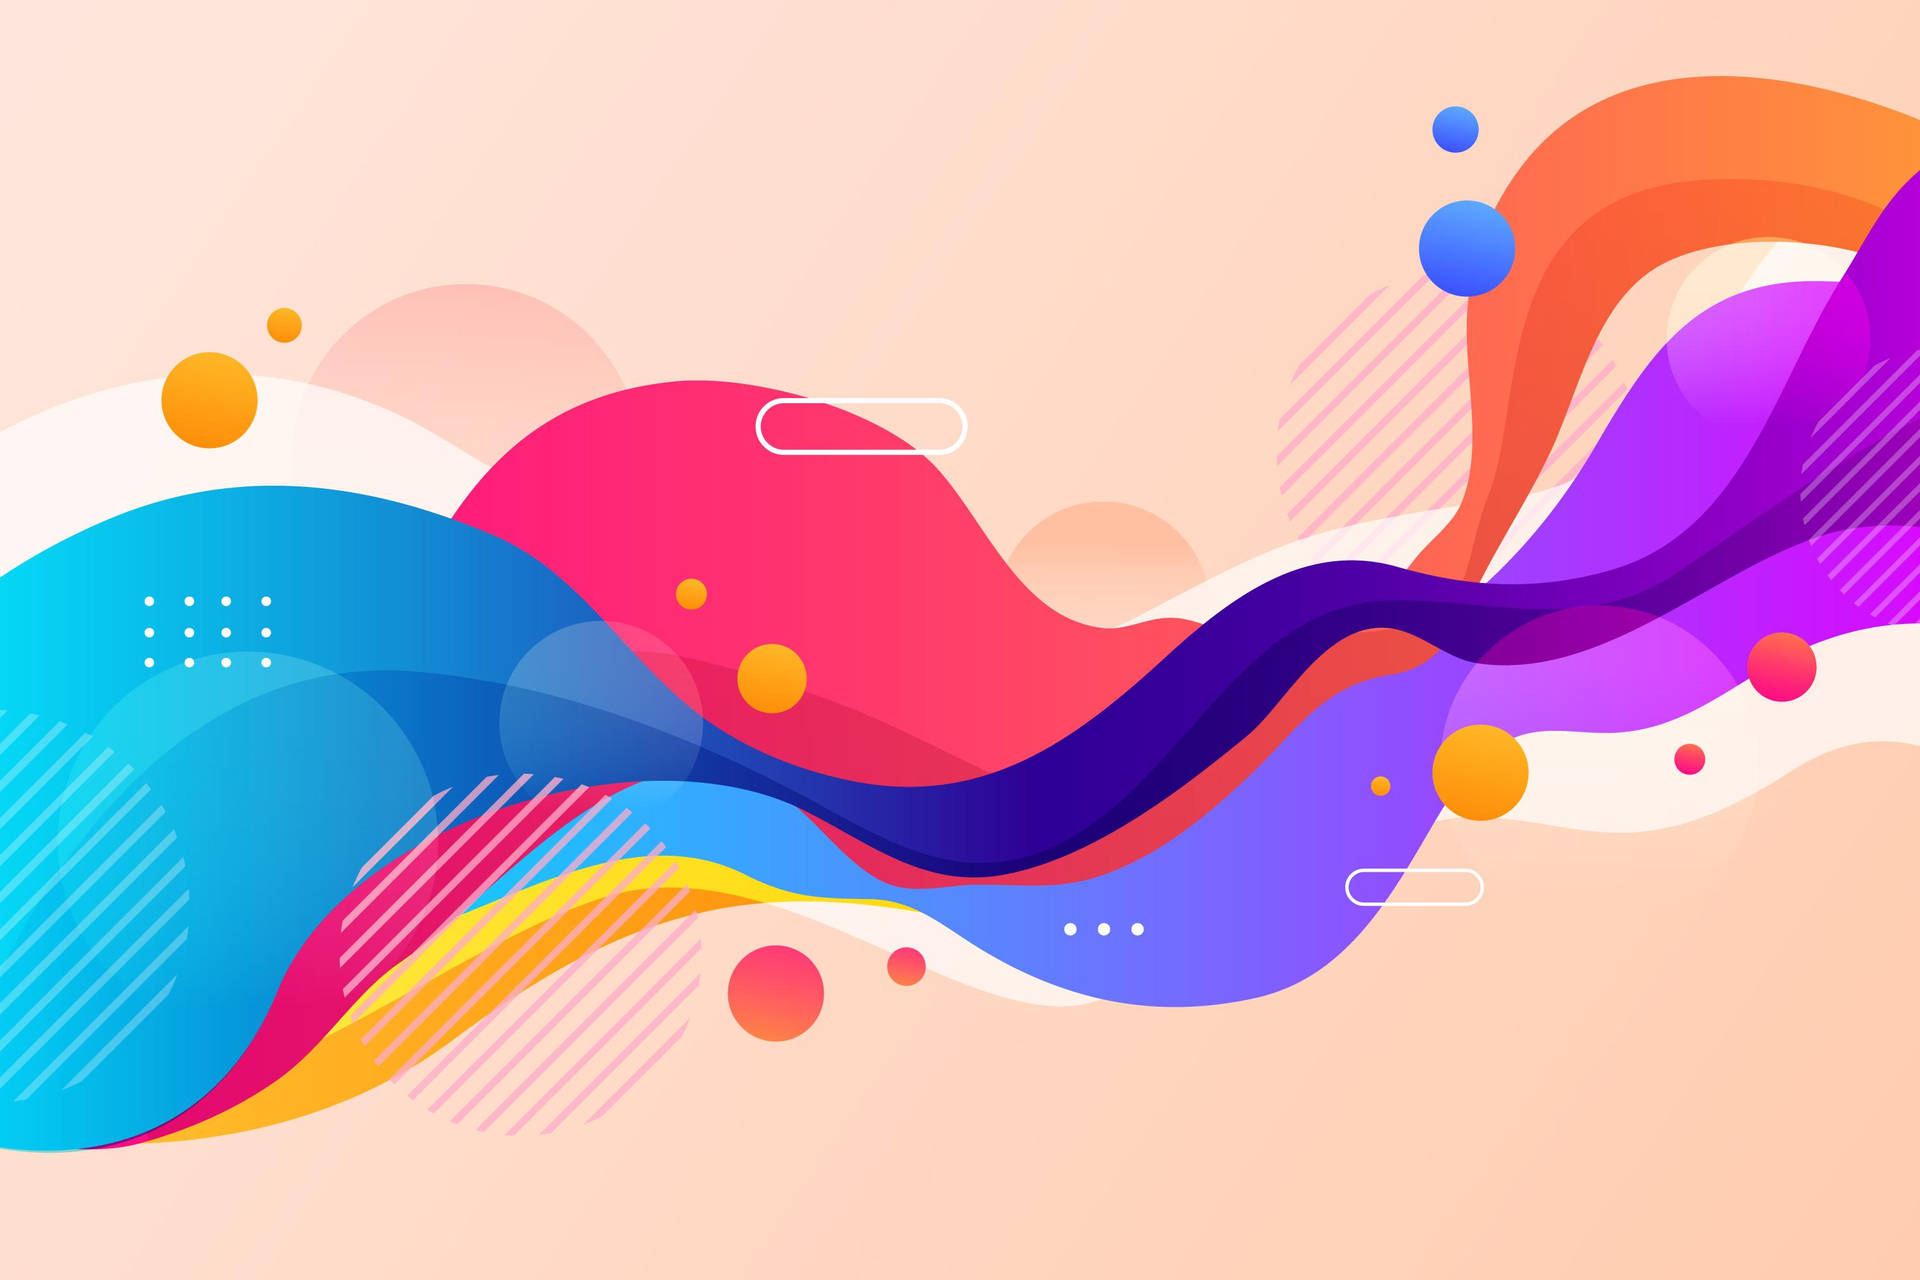 Waves Of Colors Against A Cream Color Background Wallpaper